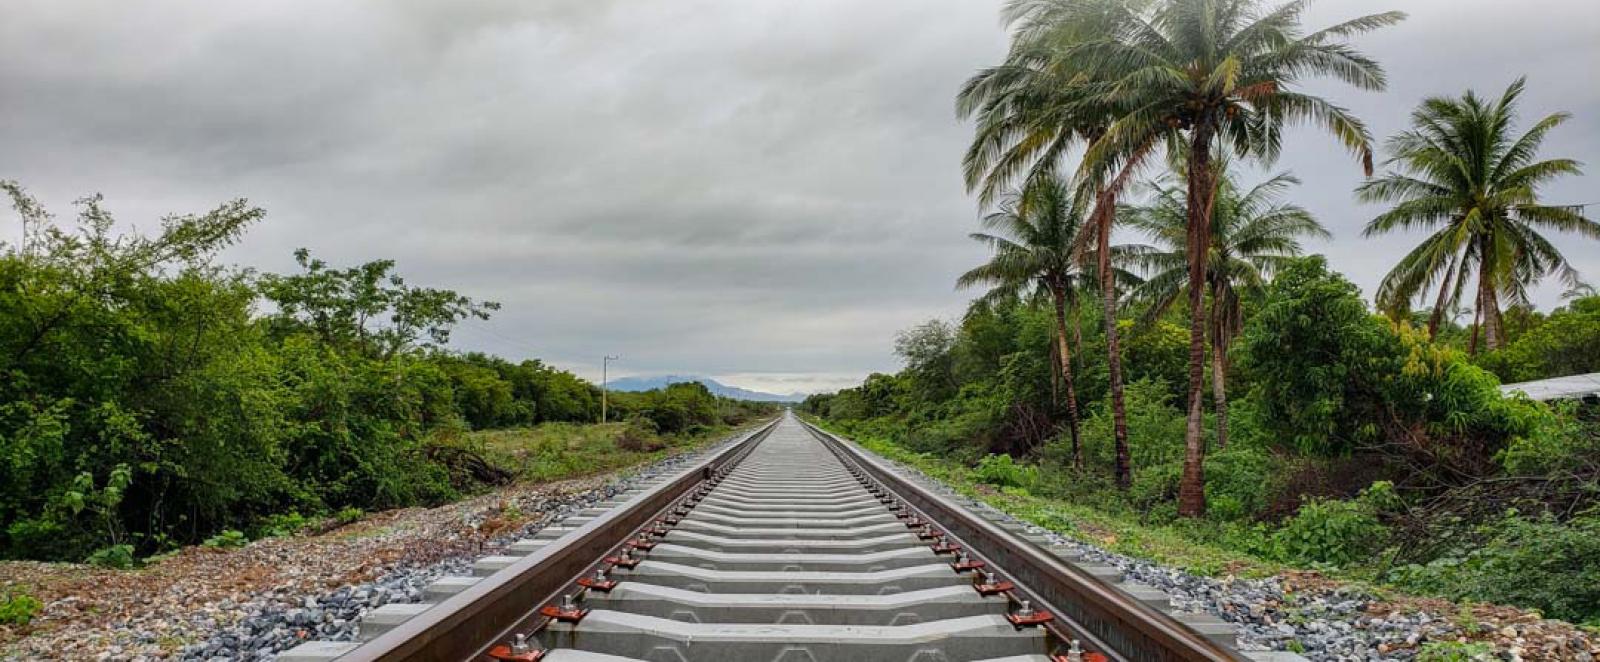 A remodeled section of the Isthmus of Tehuantepec Railroad. 